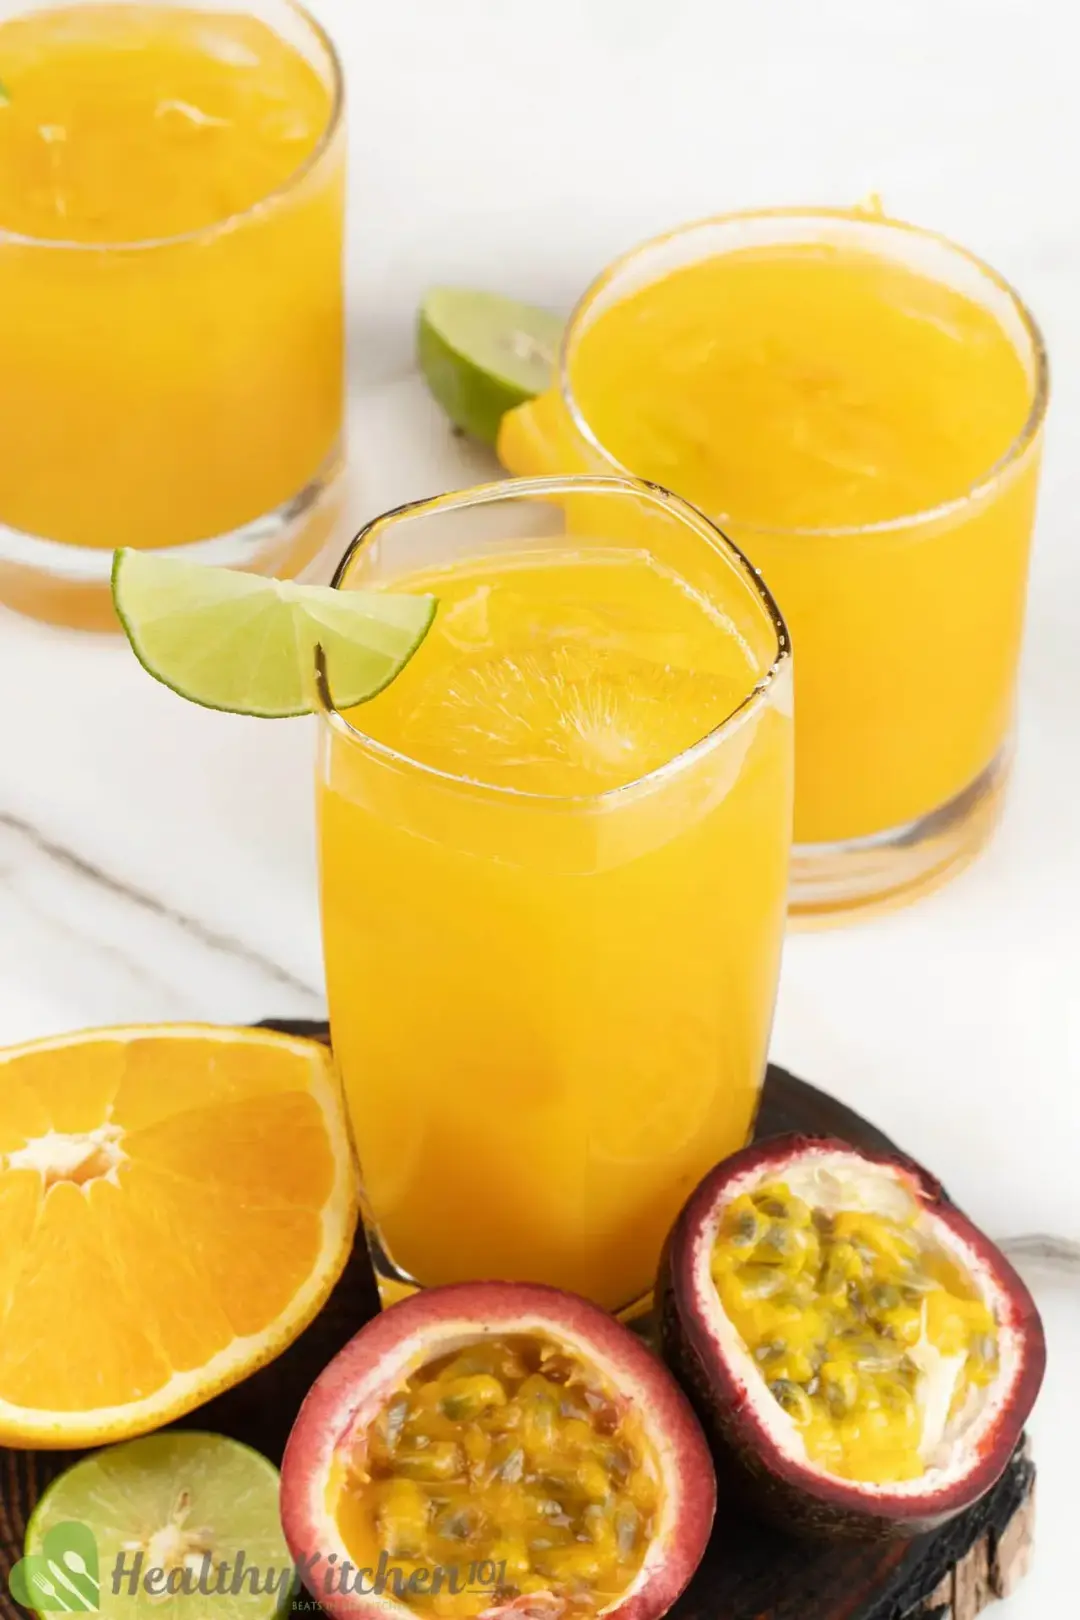 Three glasses of passion fruit margarita with lime wedge, next to passion fruit halves and an orange half